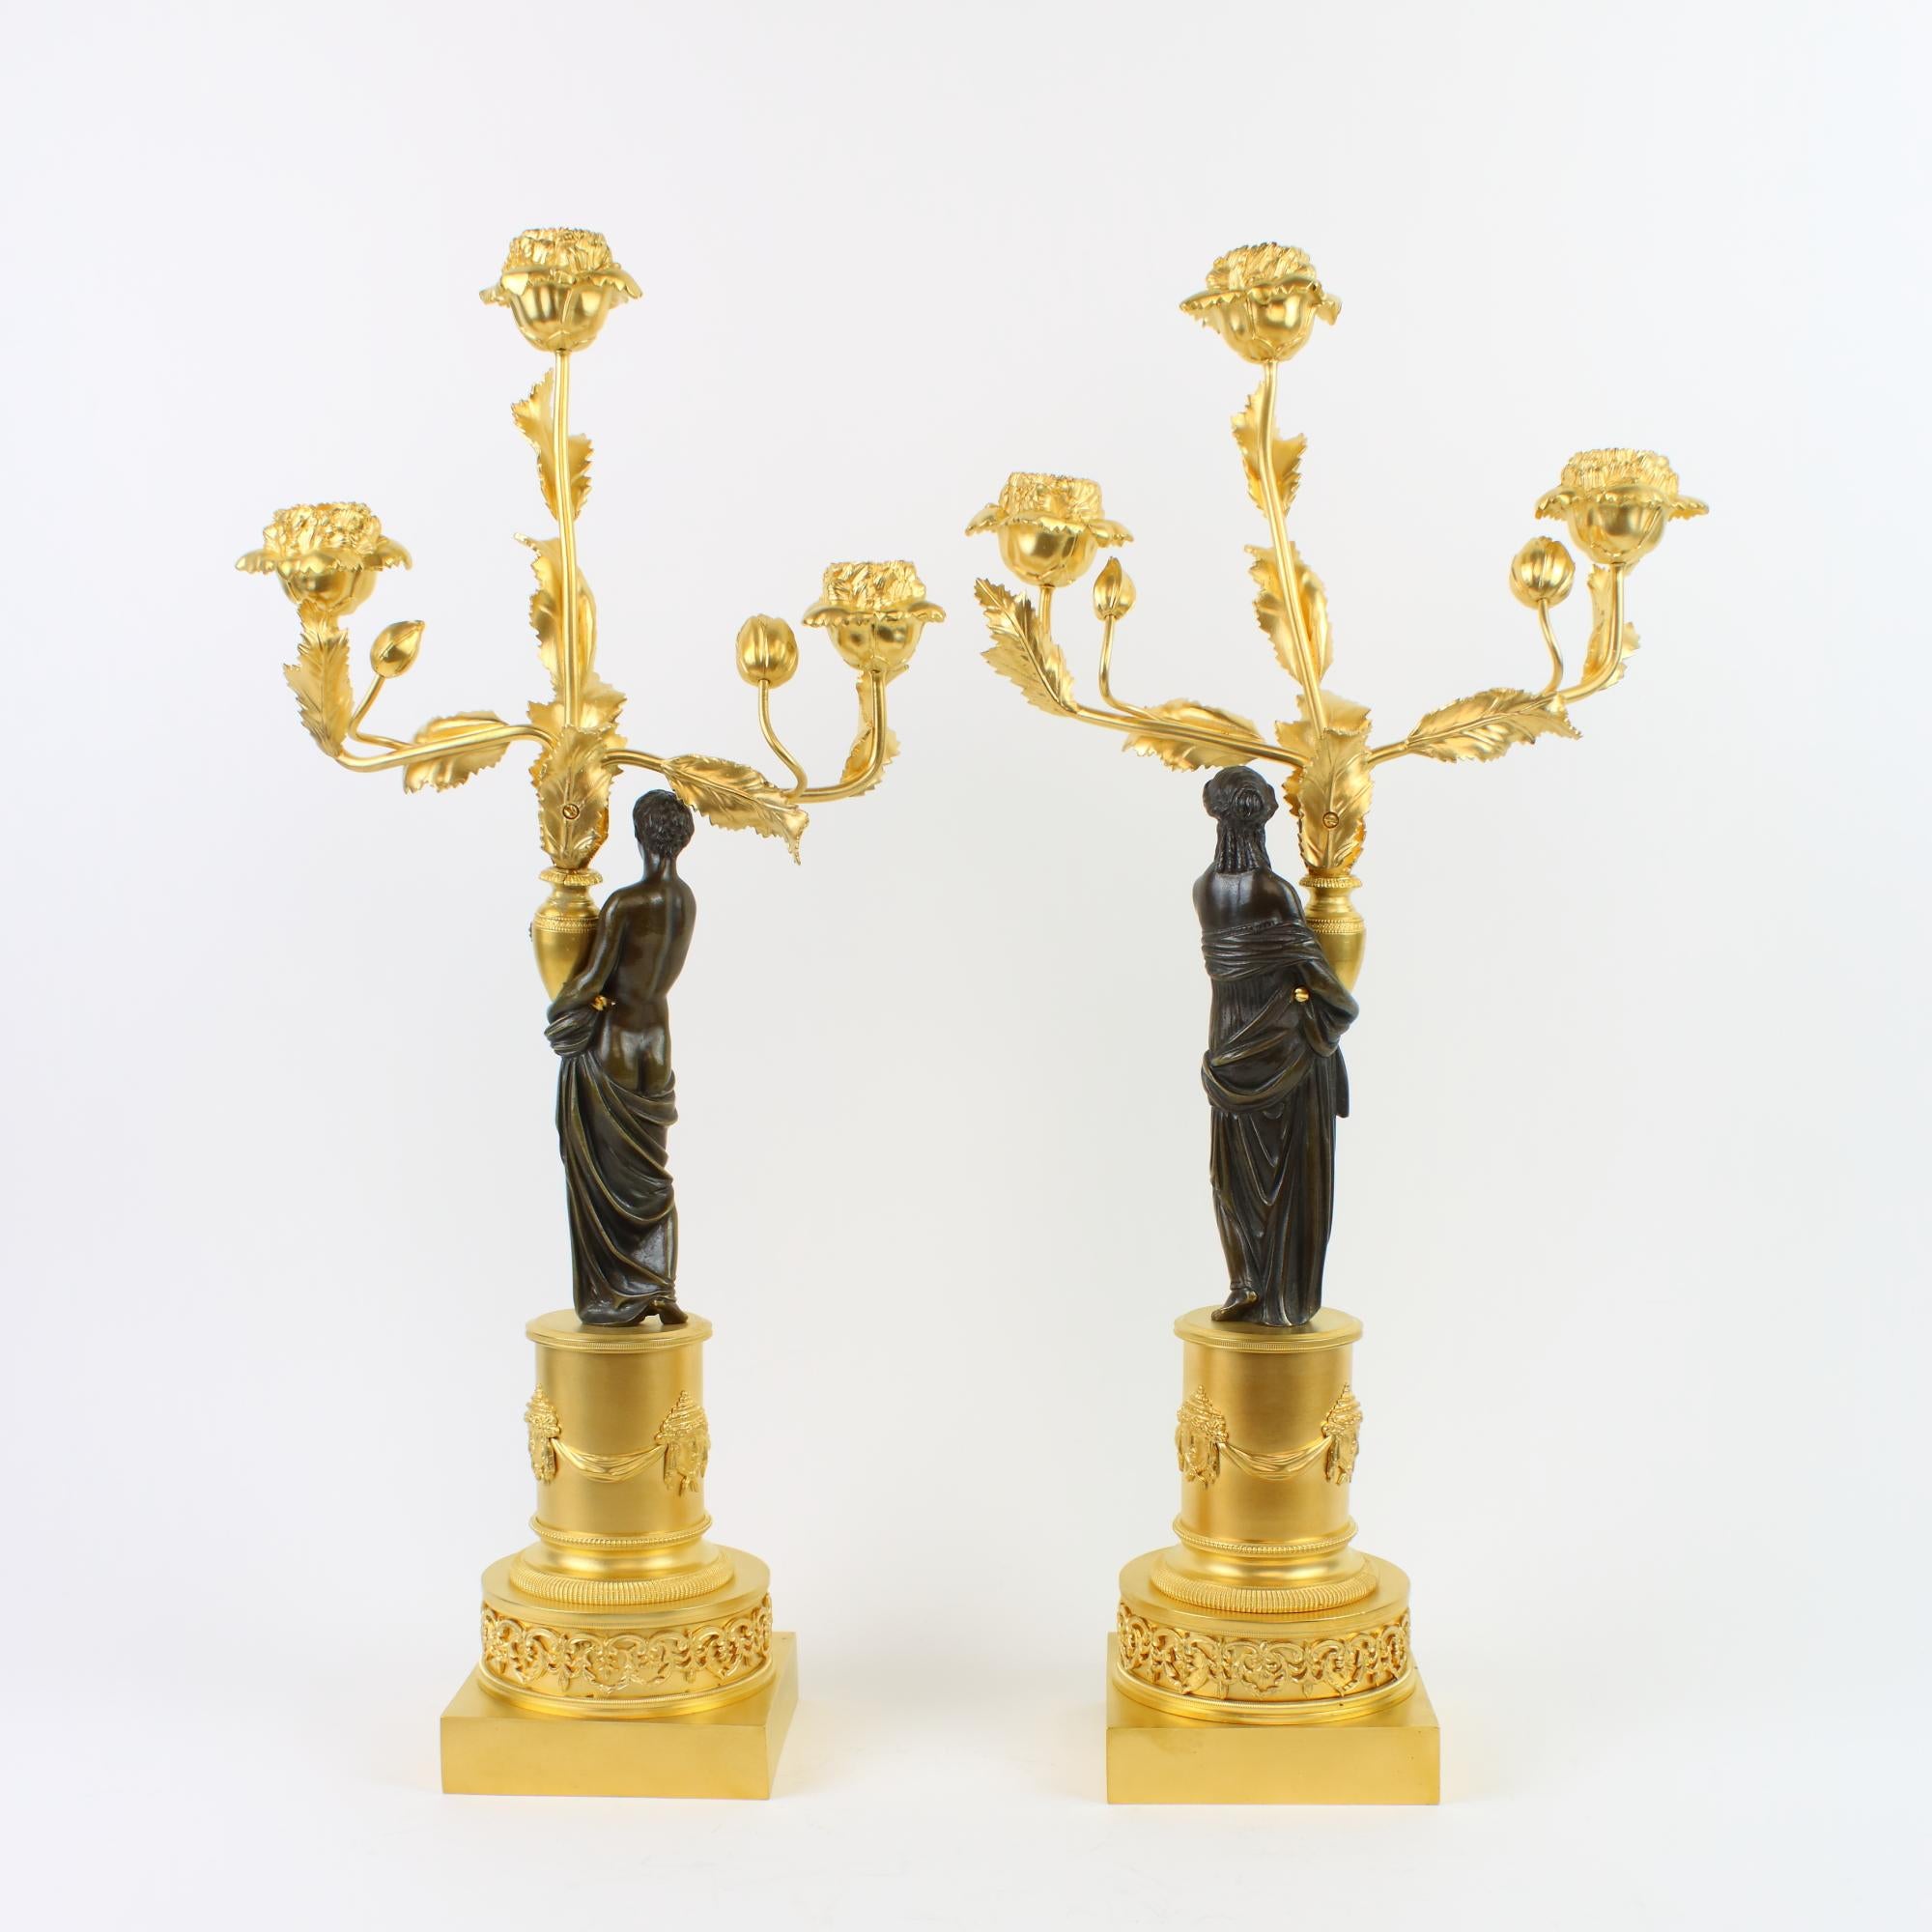 Neoclassical 18th/19th Century Pair of Russian Figural Gilt and Patinated Bronze Candelabra For Sale